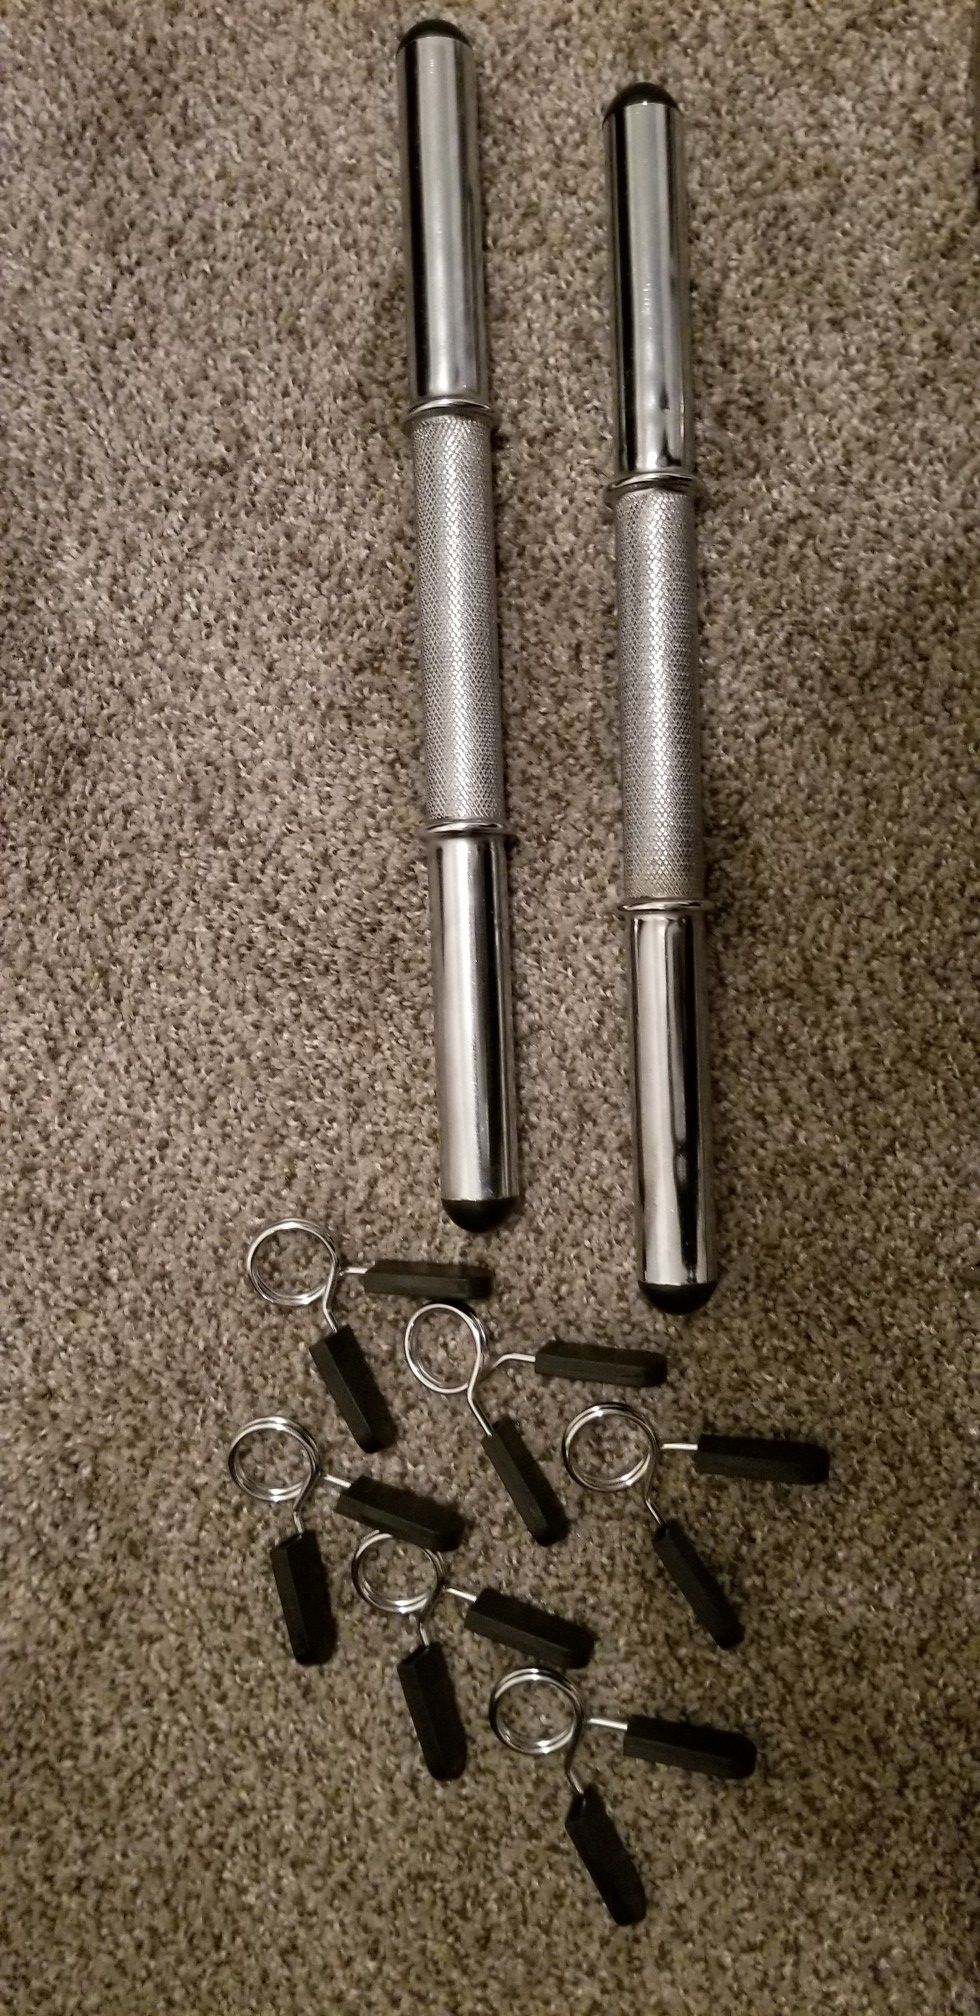 New, never used lifting set.